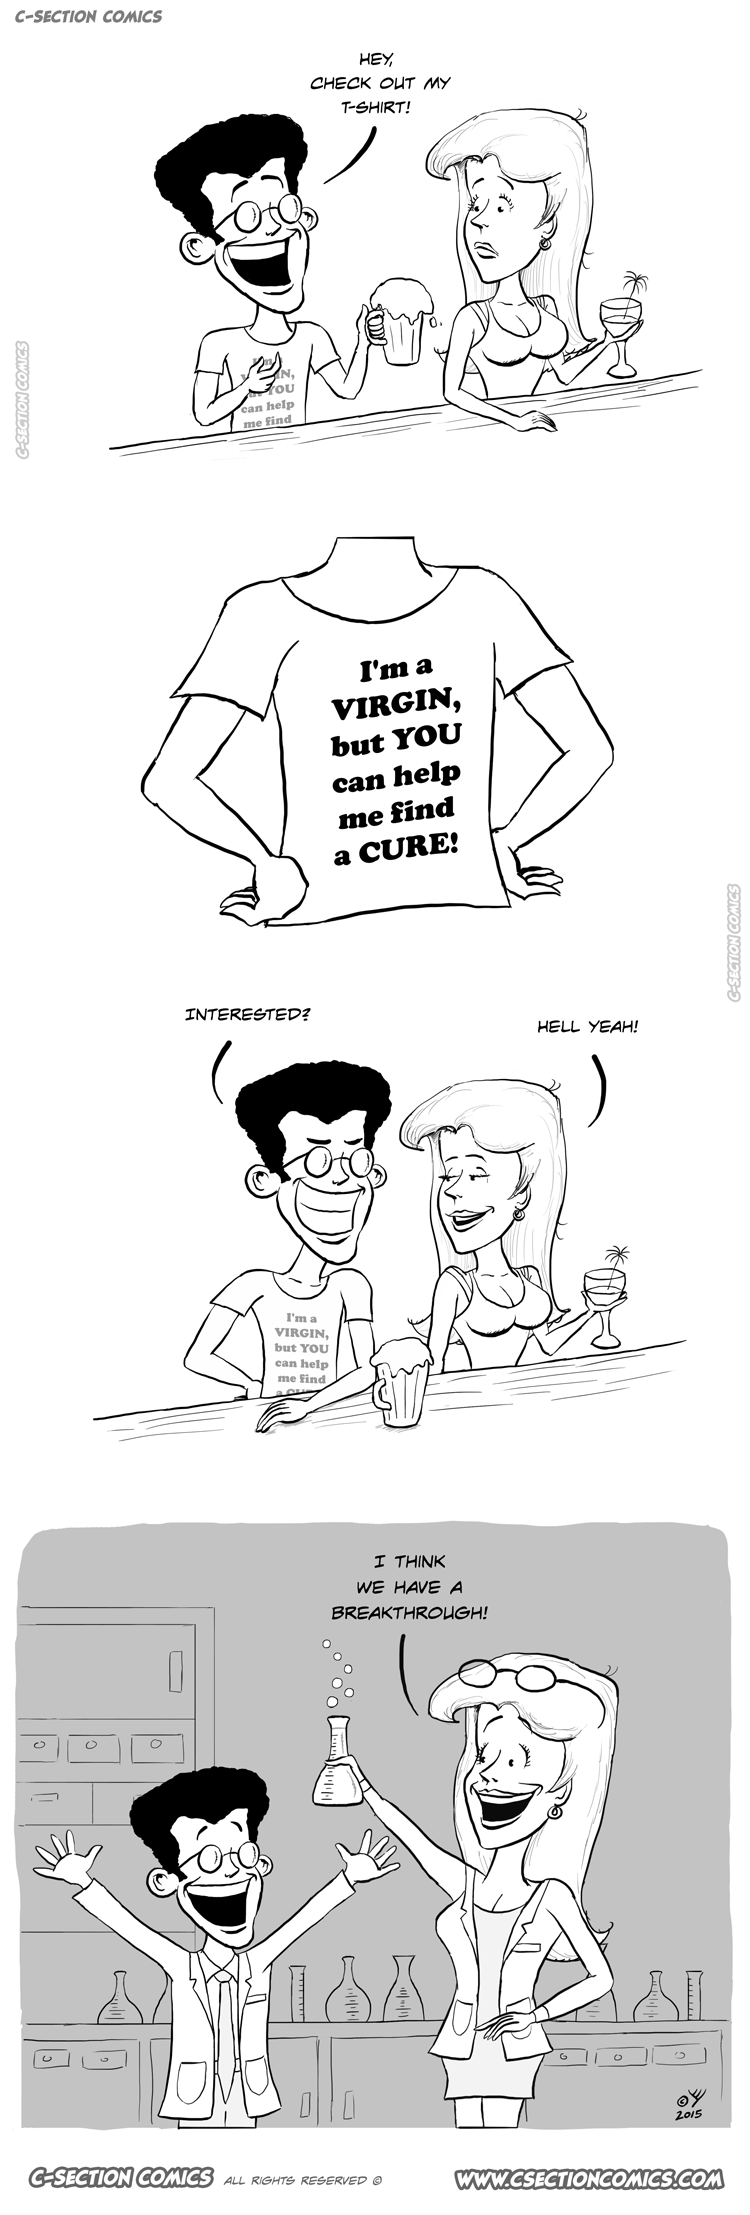 I'm a virgin, but you can help me find a cure - by C-Section Comics